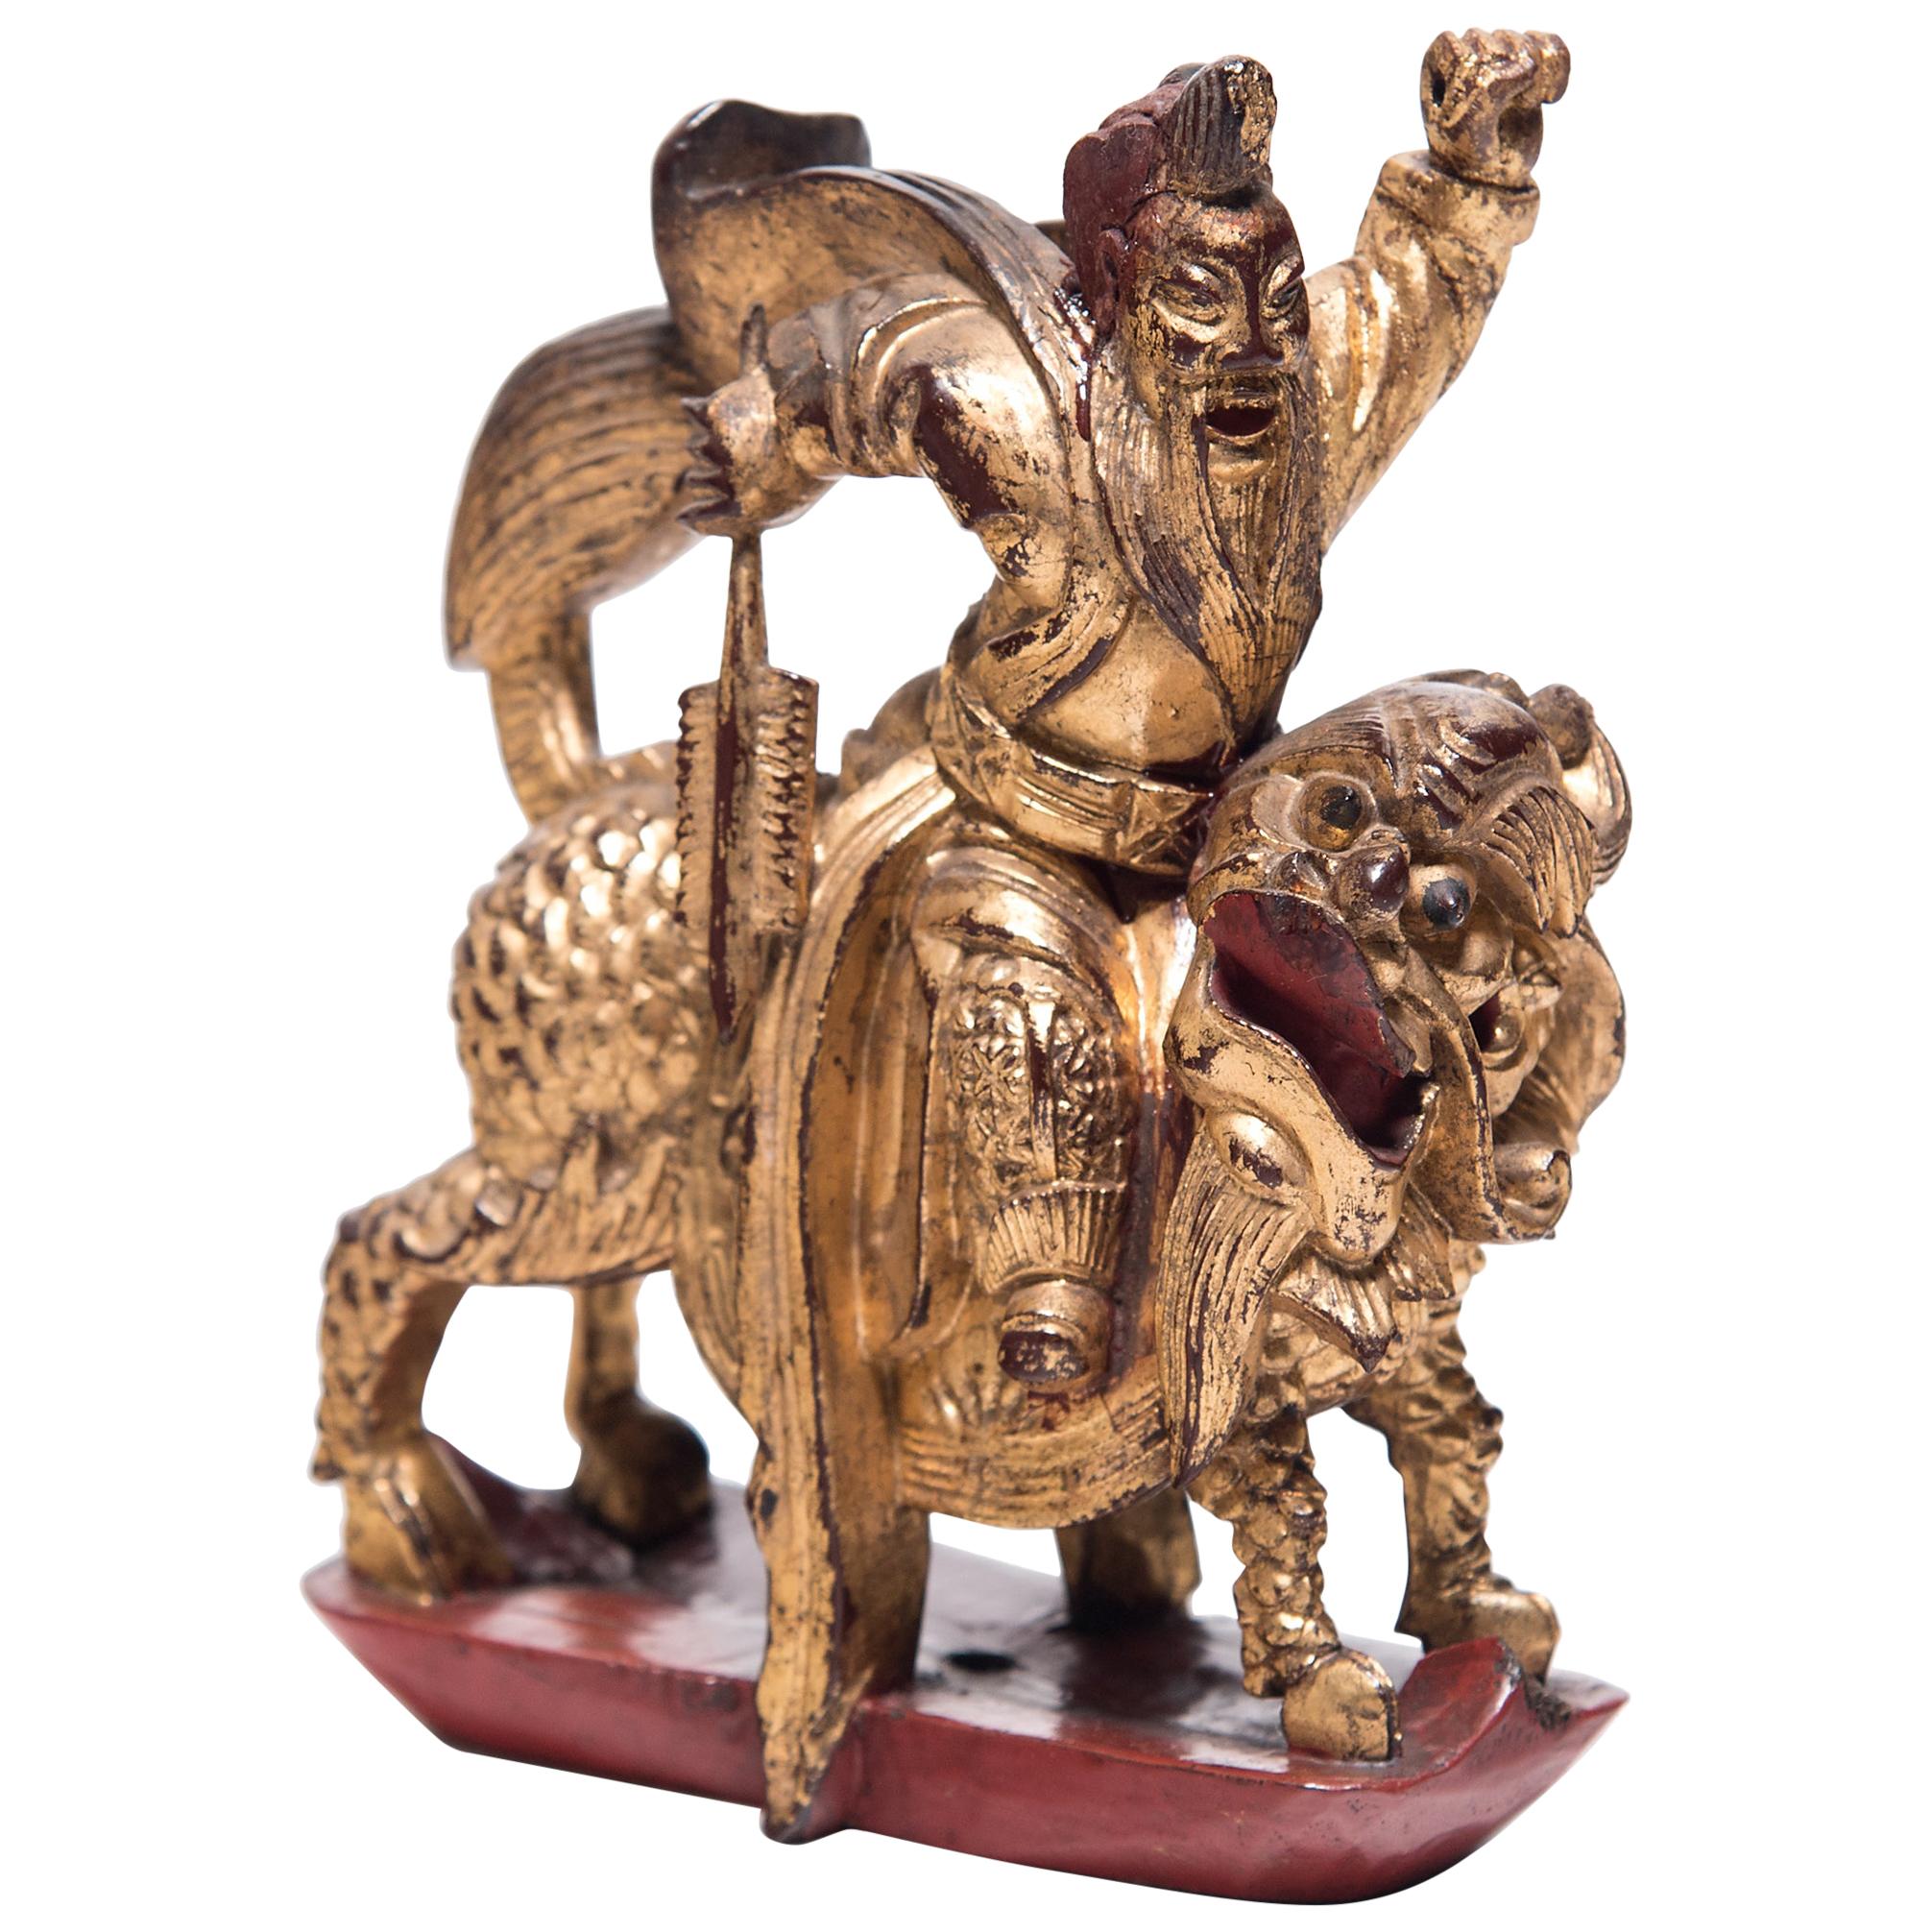 Chinese Mythical Gilt Figure with Divine Steed, circa 1850